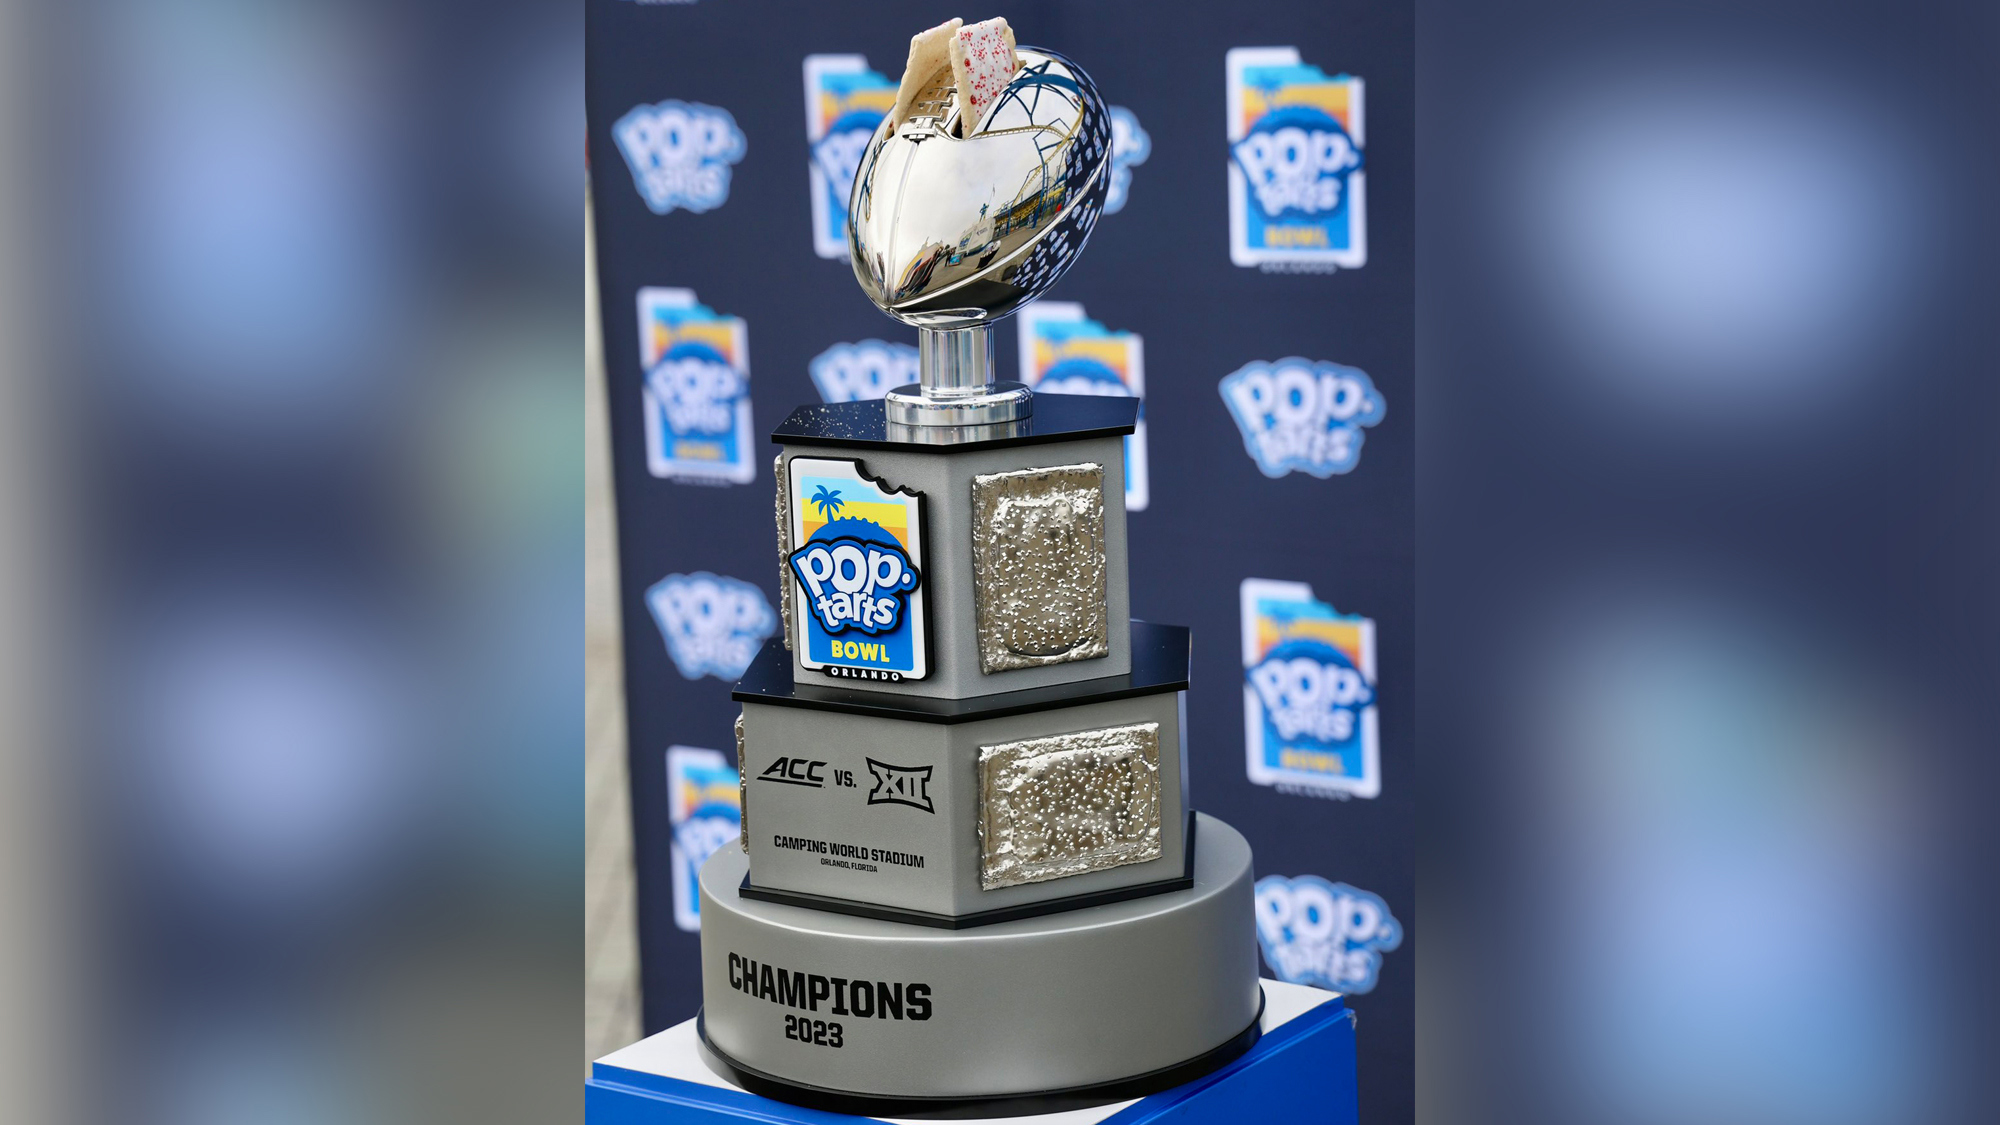 PopTarts Bowl Trophy Revealed, Includes Slots in Football for Edible